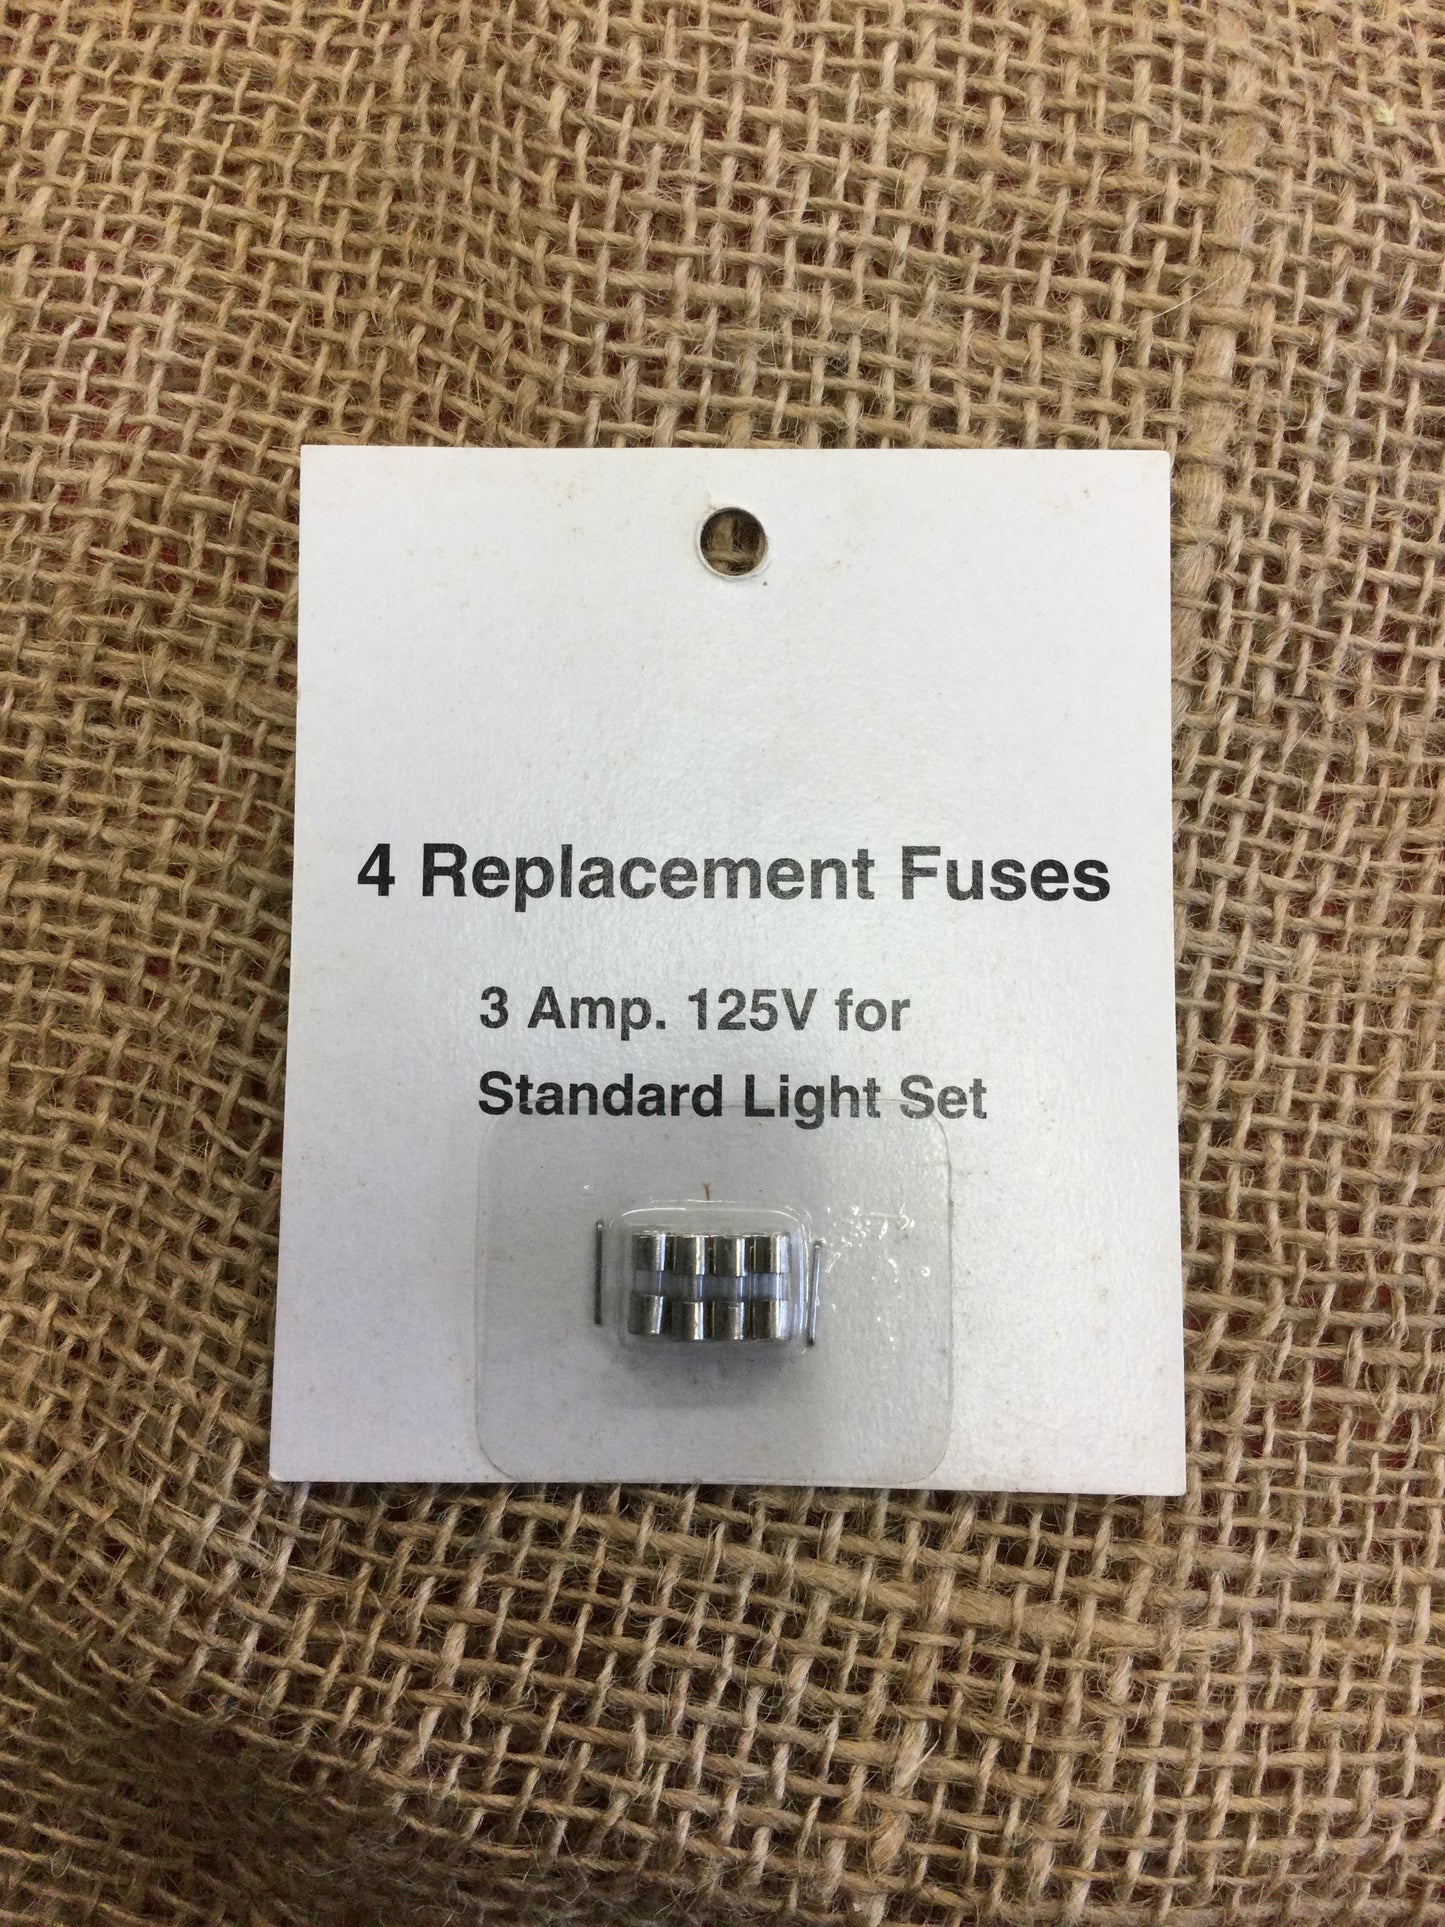 4 3Amp replacement fuses